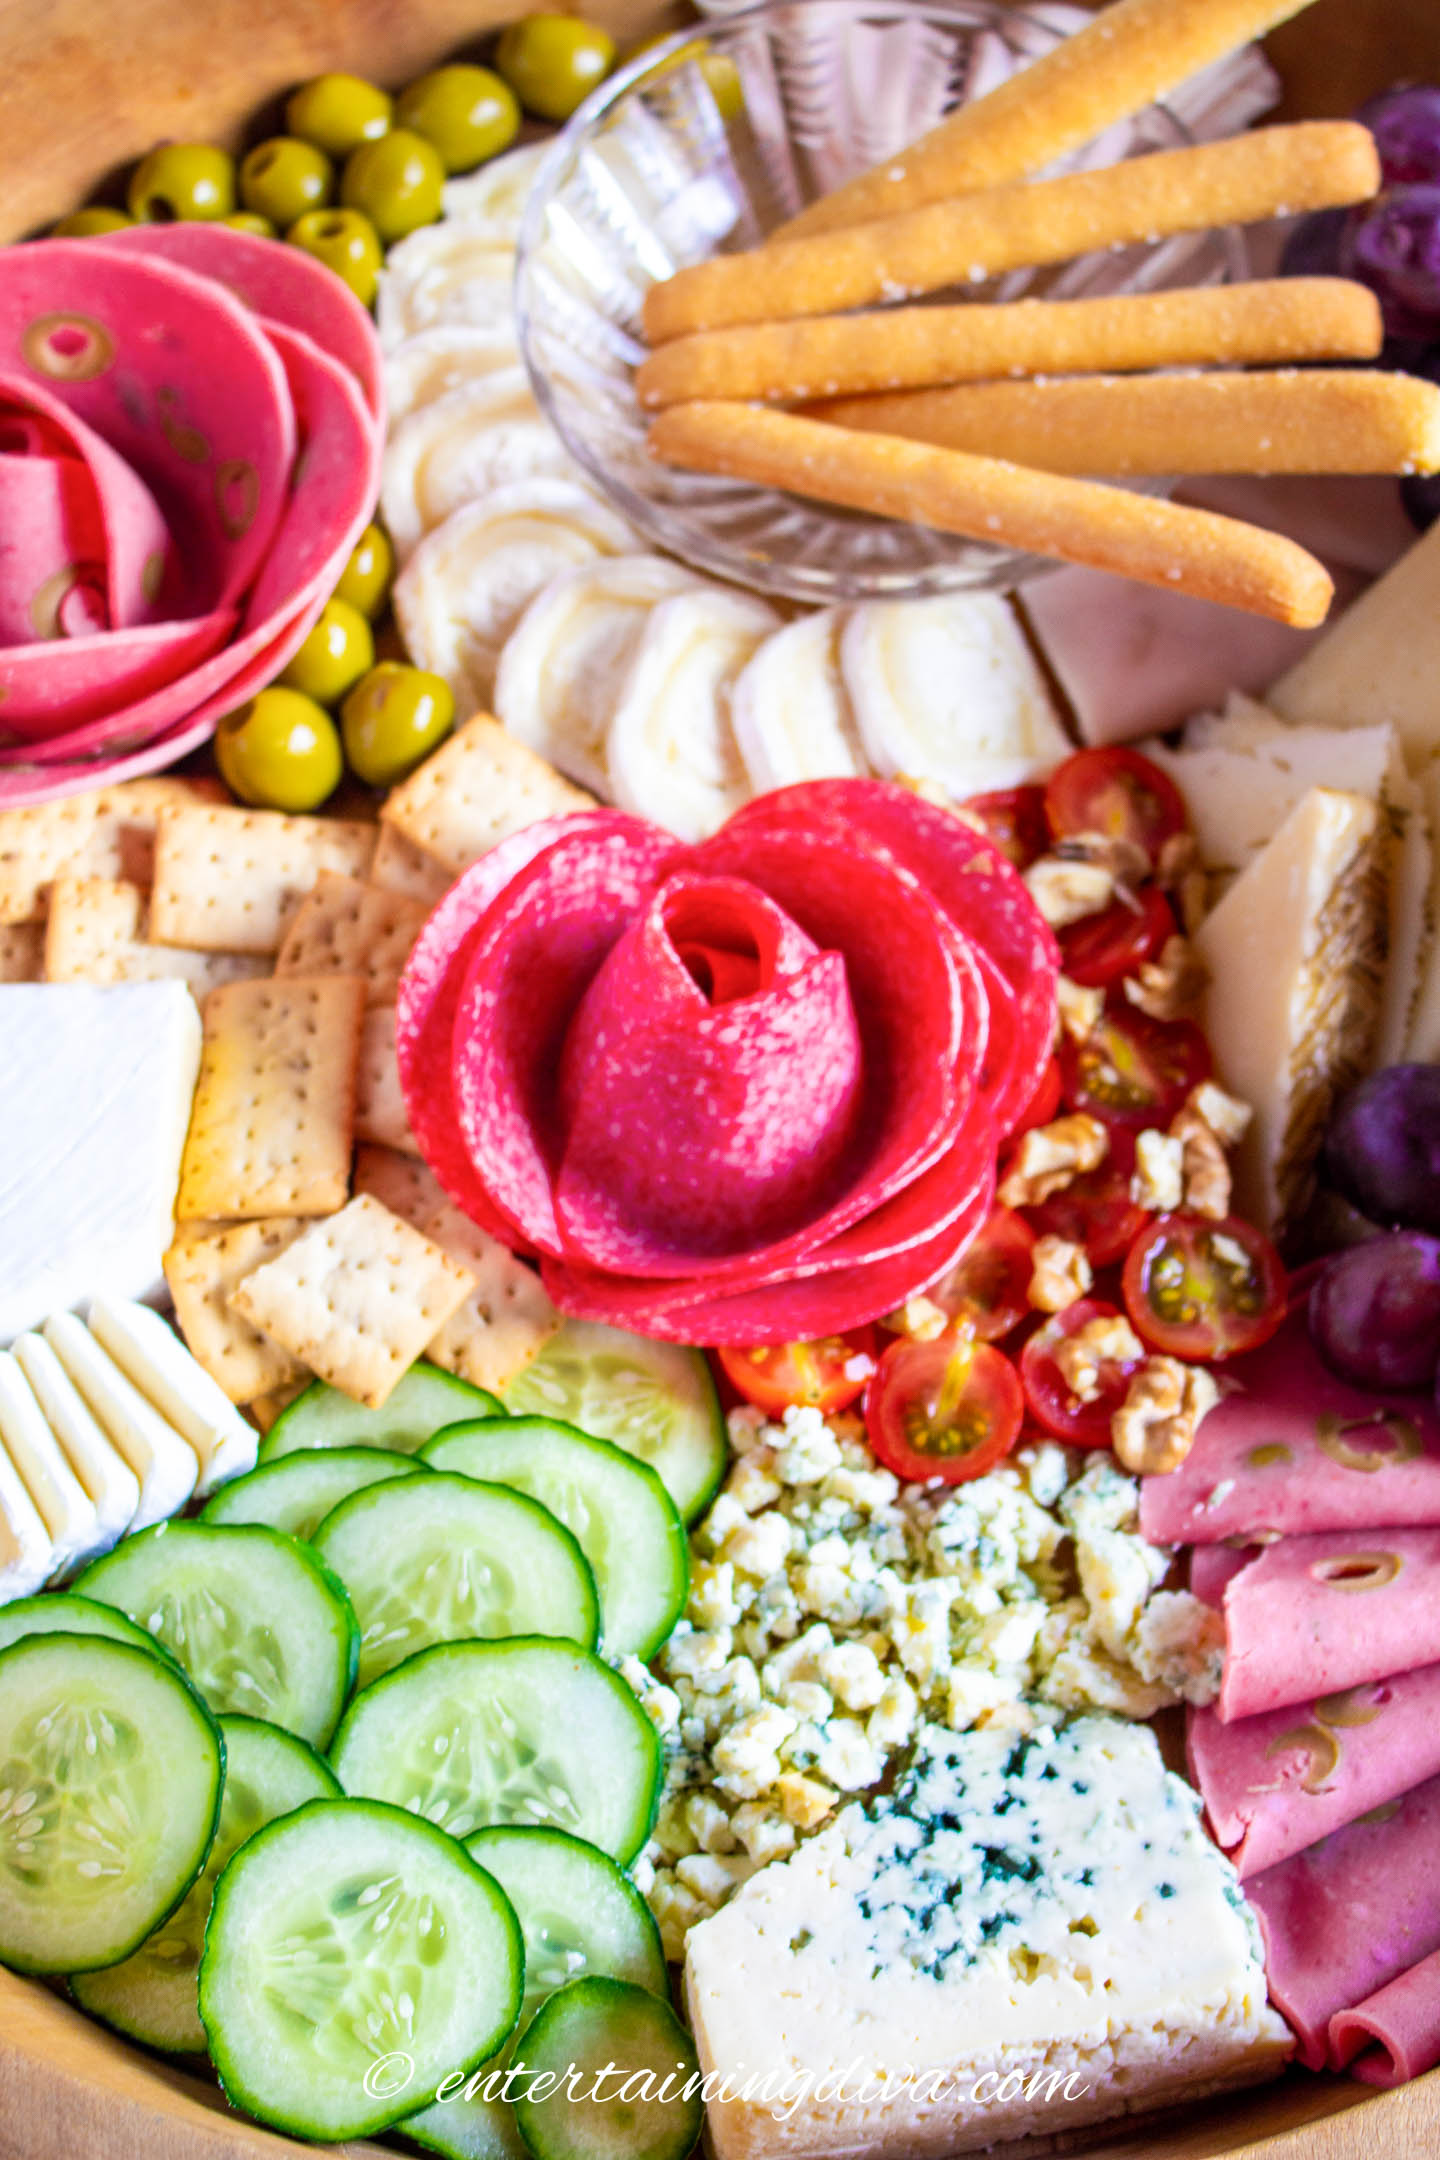 A charcuterie board with sliced meat in a flower shape, cucumbers, crackers breadsticks, cherry tomatoes, olives and gorgonzola cheese